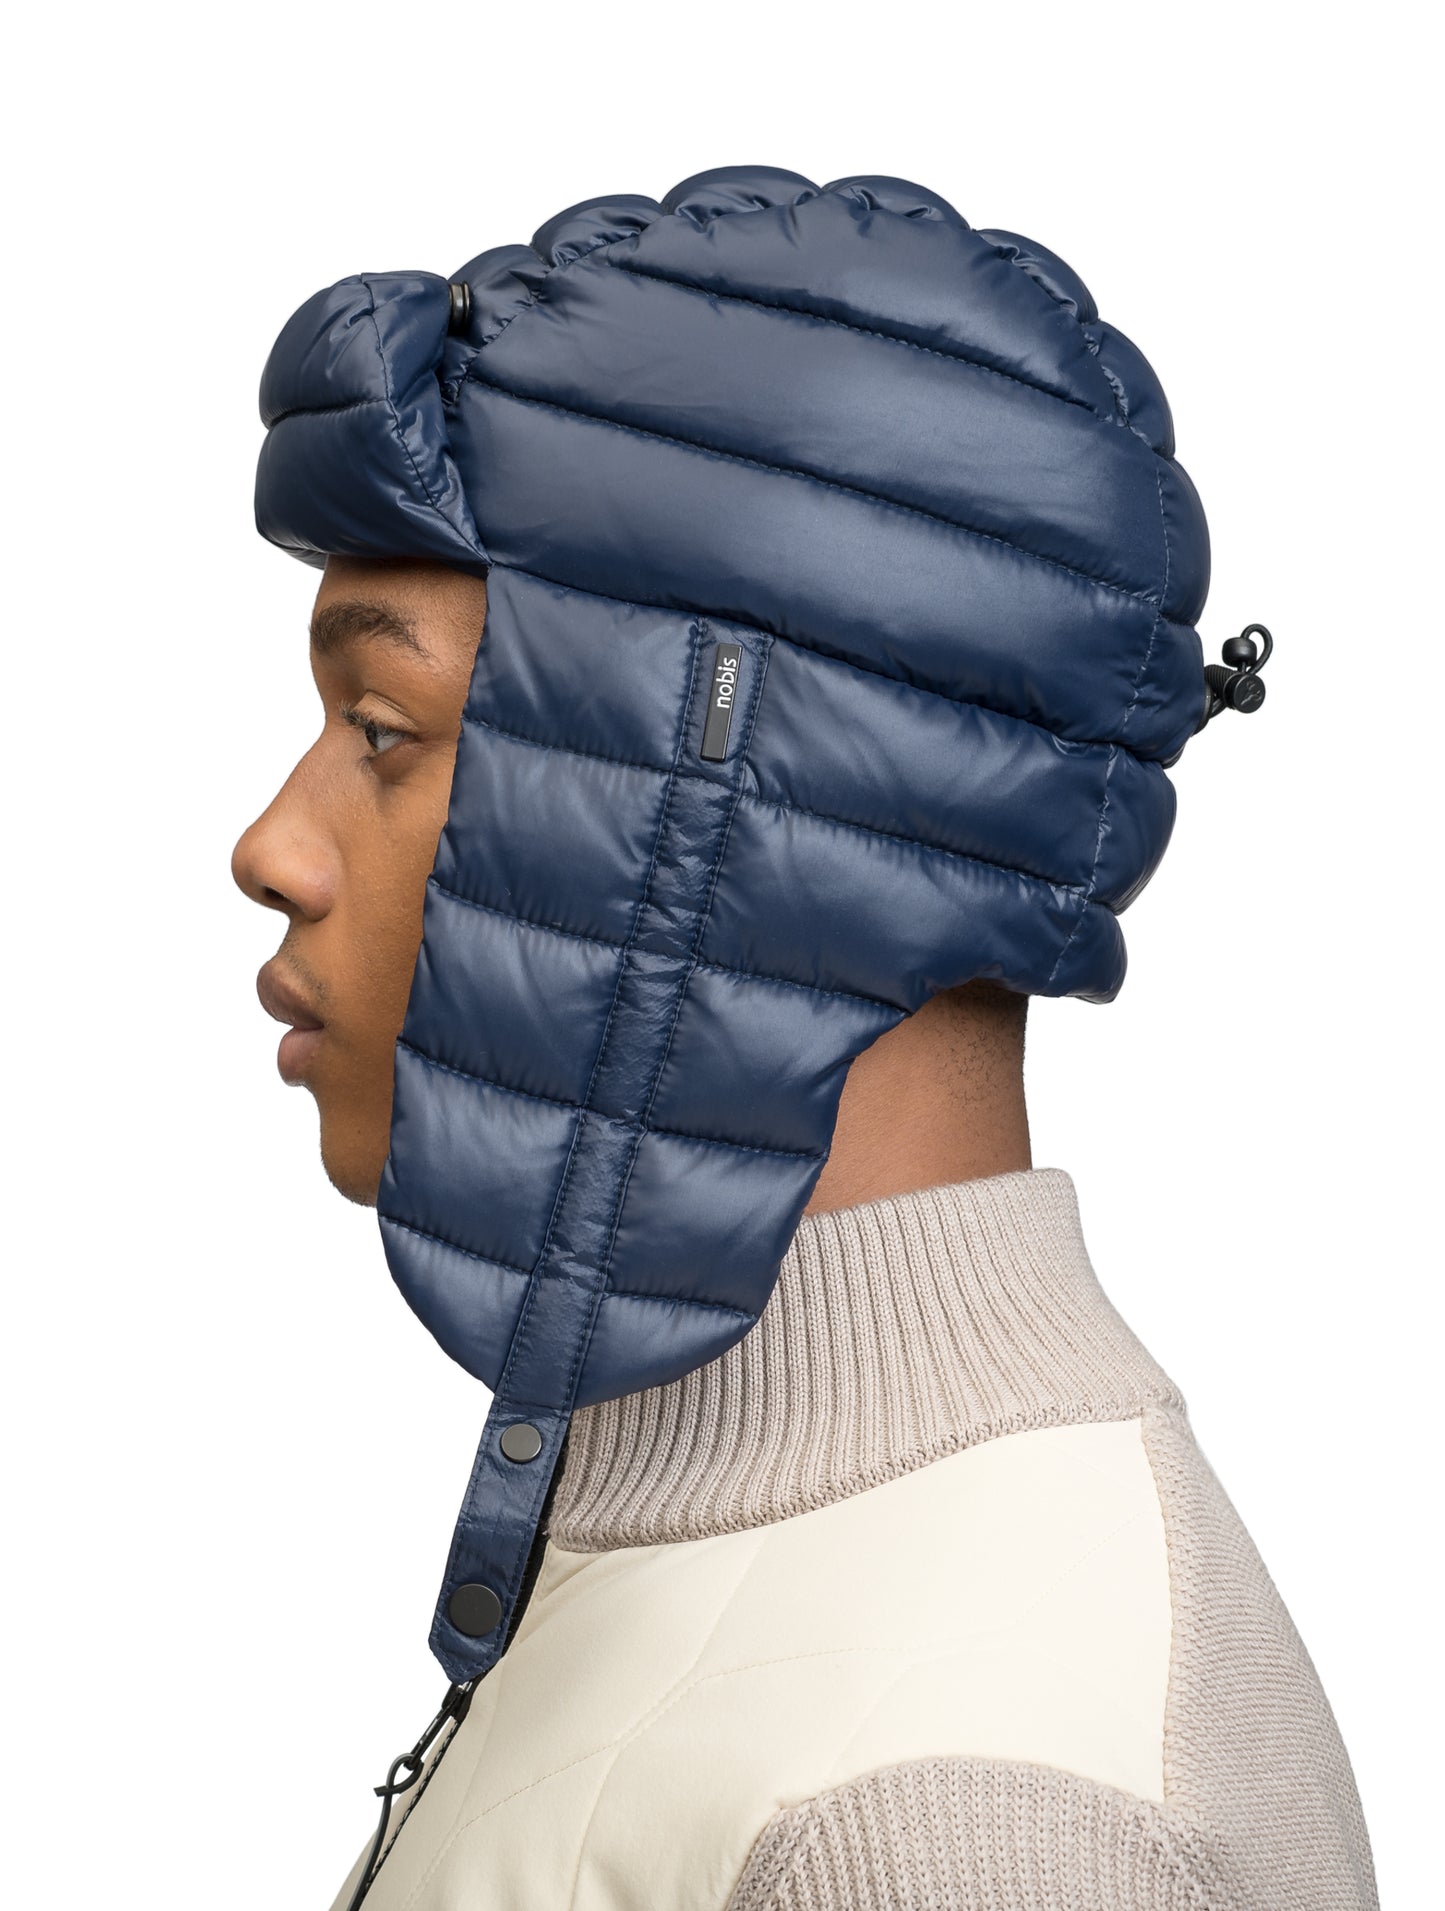 Unisex down-filled quilted fargo hat with adjustable chin strap in Marine